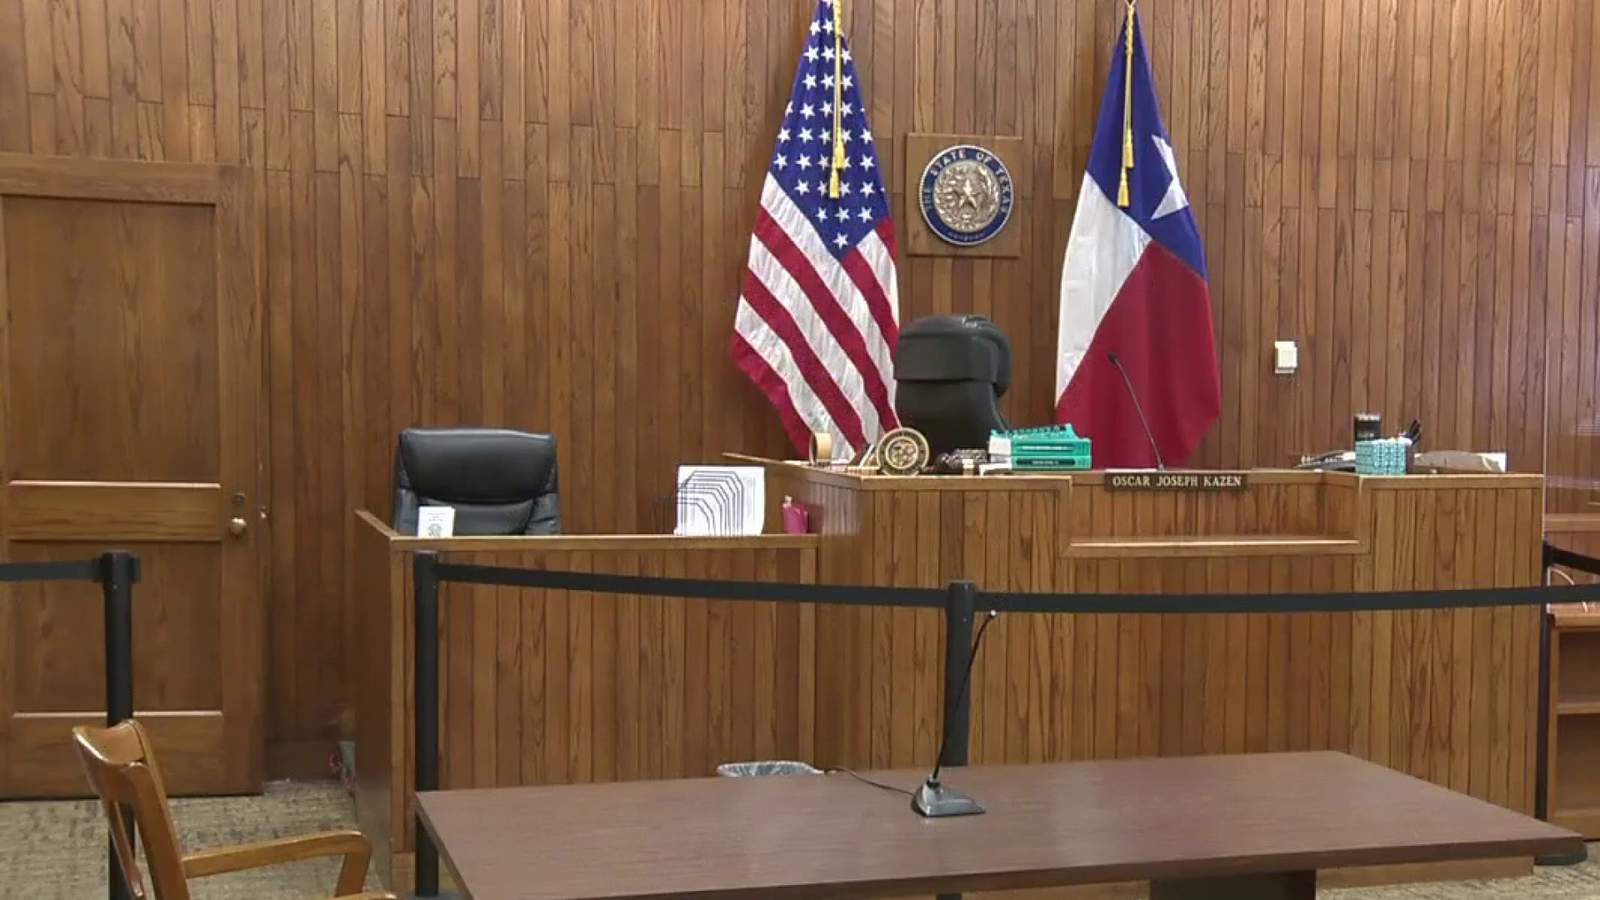 Criminal Courts in Bexar County to open Monday on limited basis